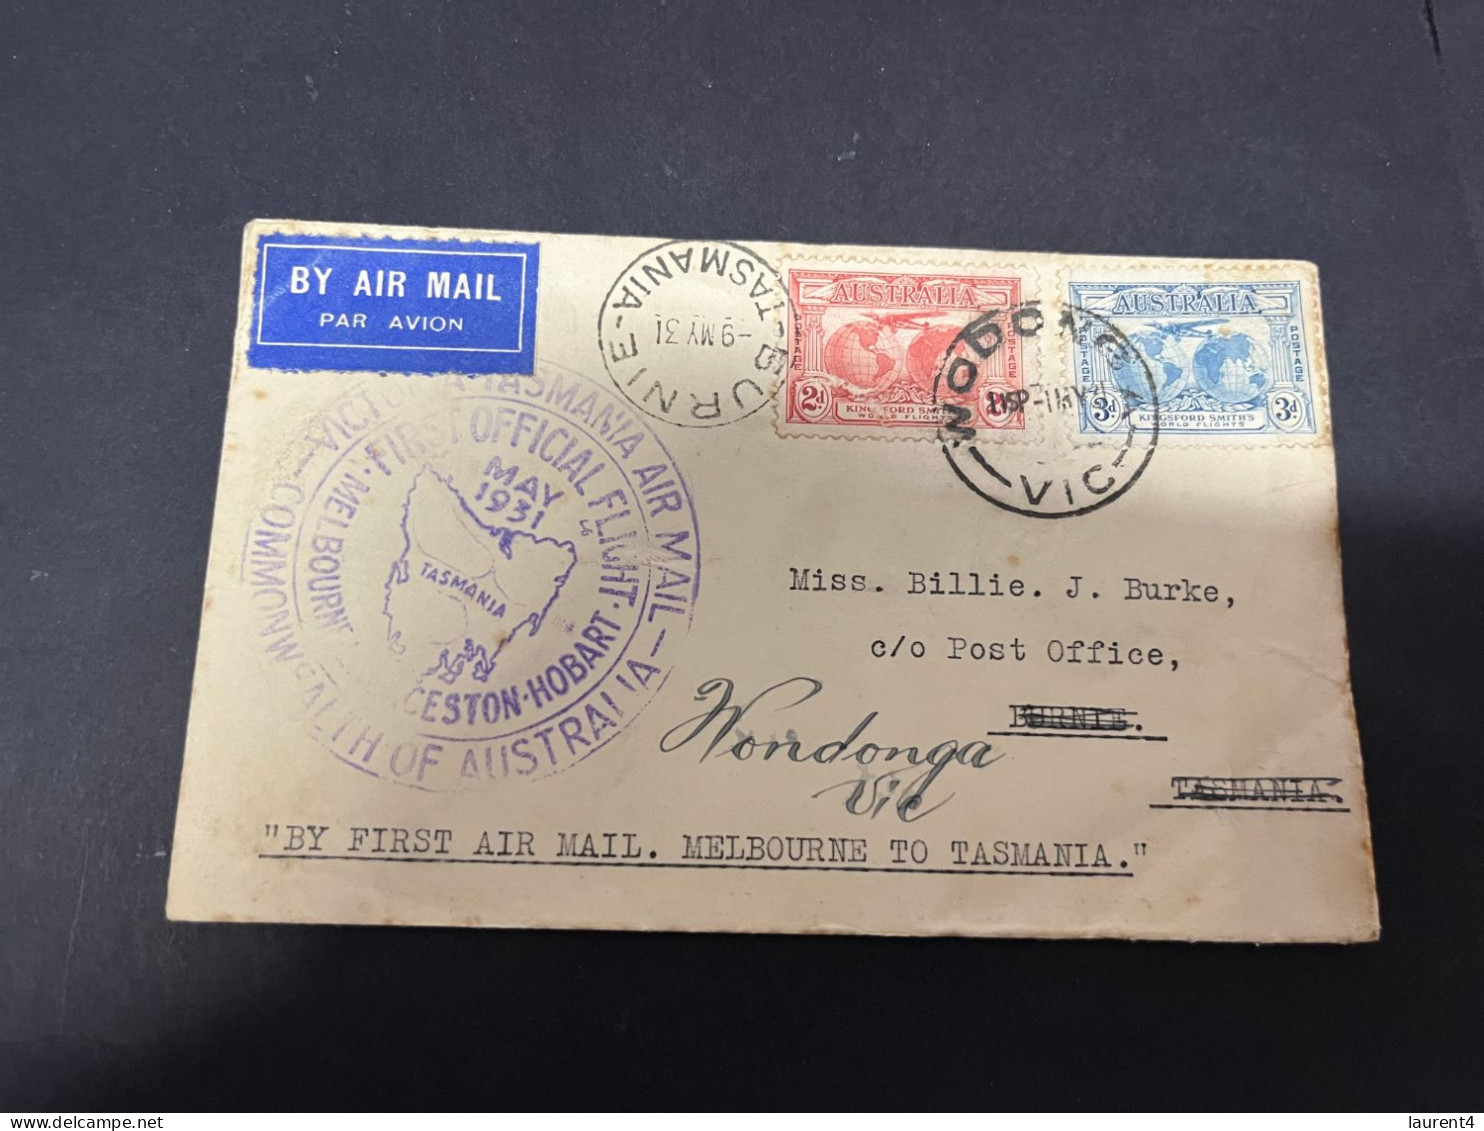 3-3-2024 (2 Y 3) Posted 1931 - First Air Mail From Melbourne To Tasmania (within Australia) - AIR MAIL Letter - First Flight Covers